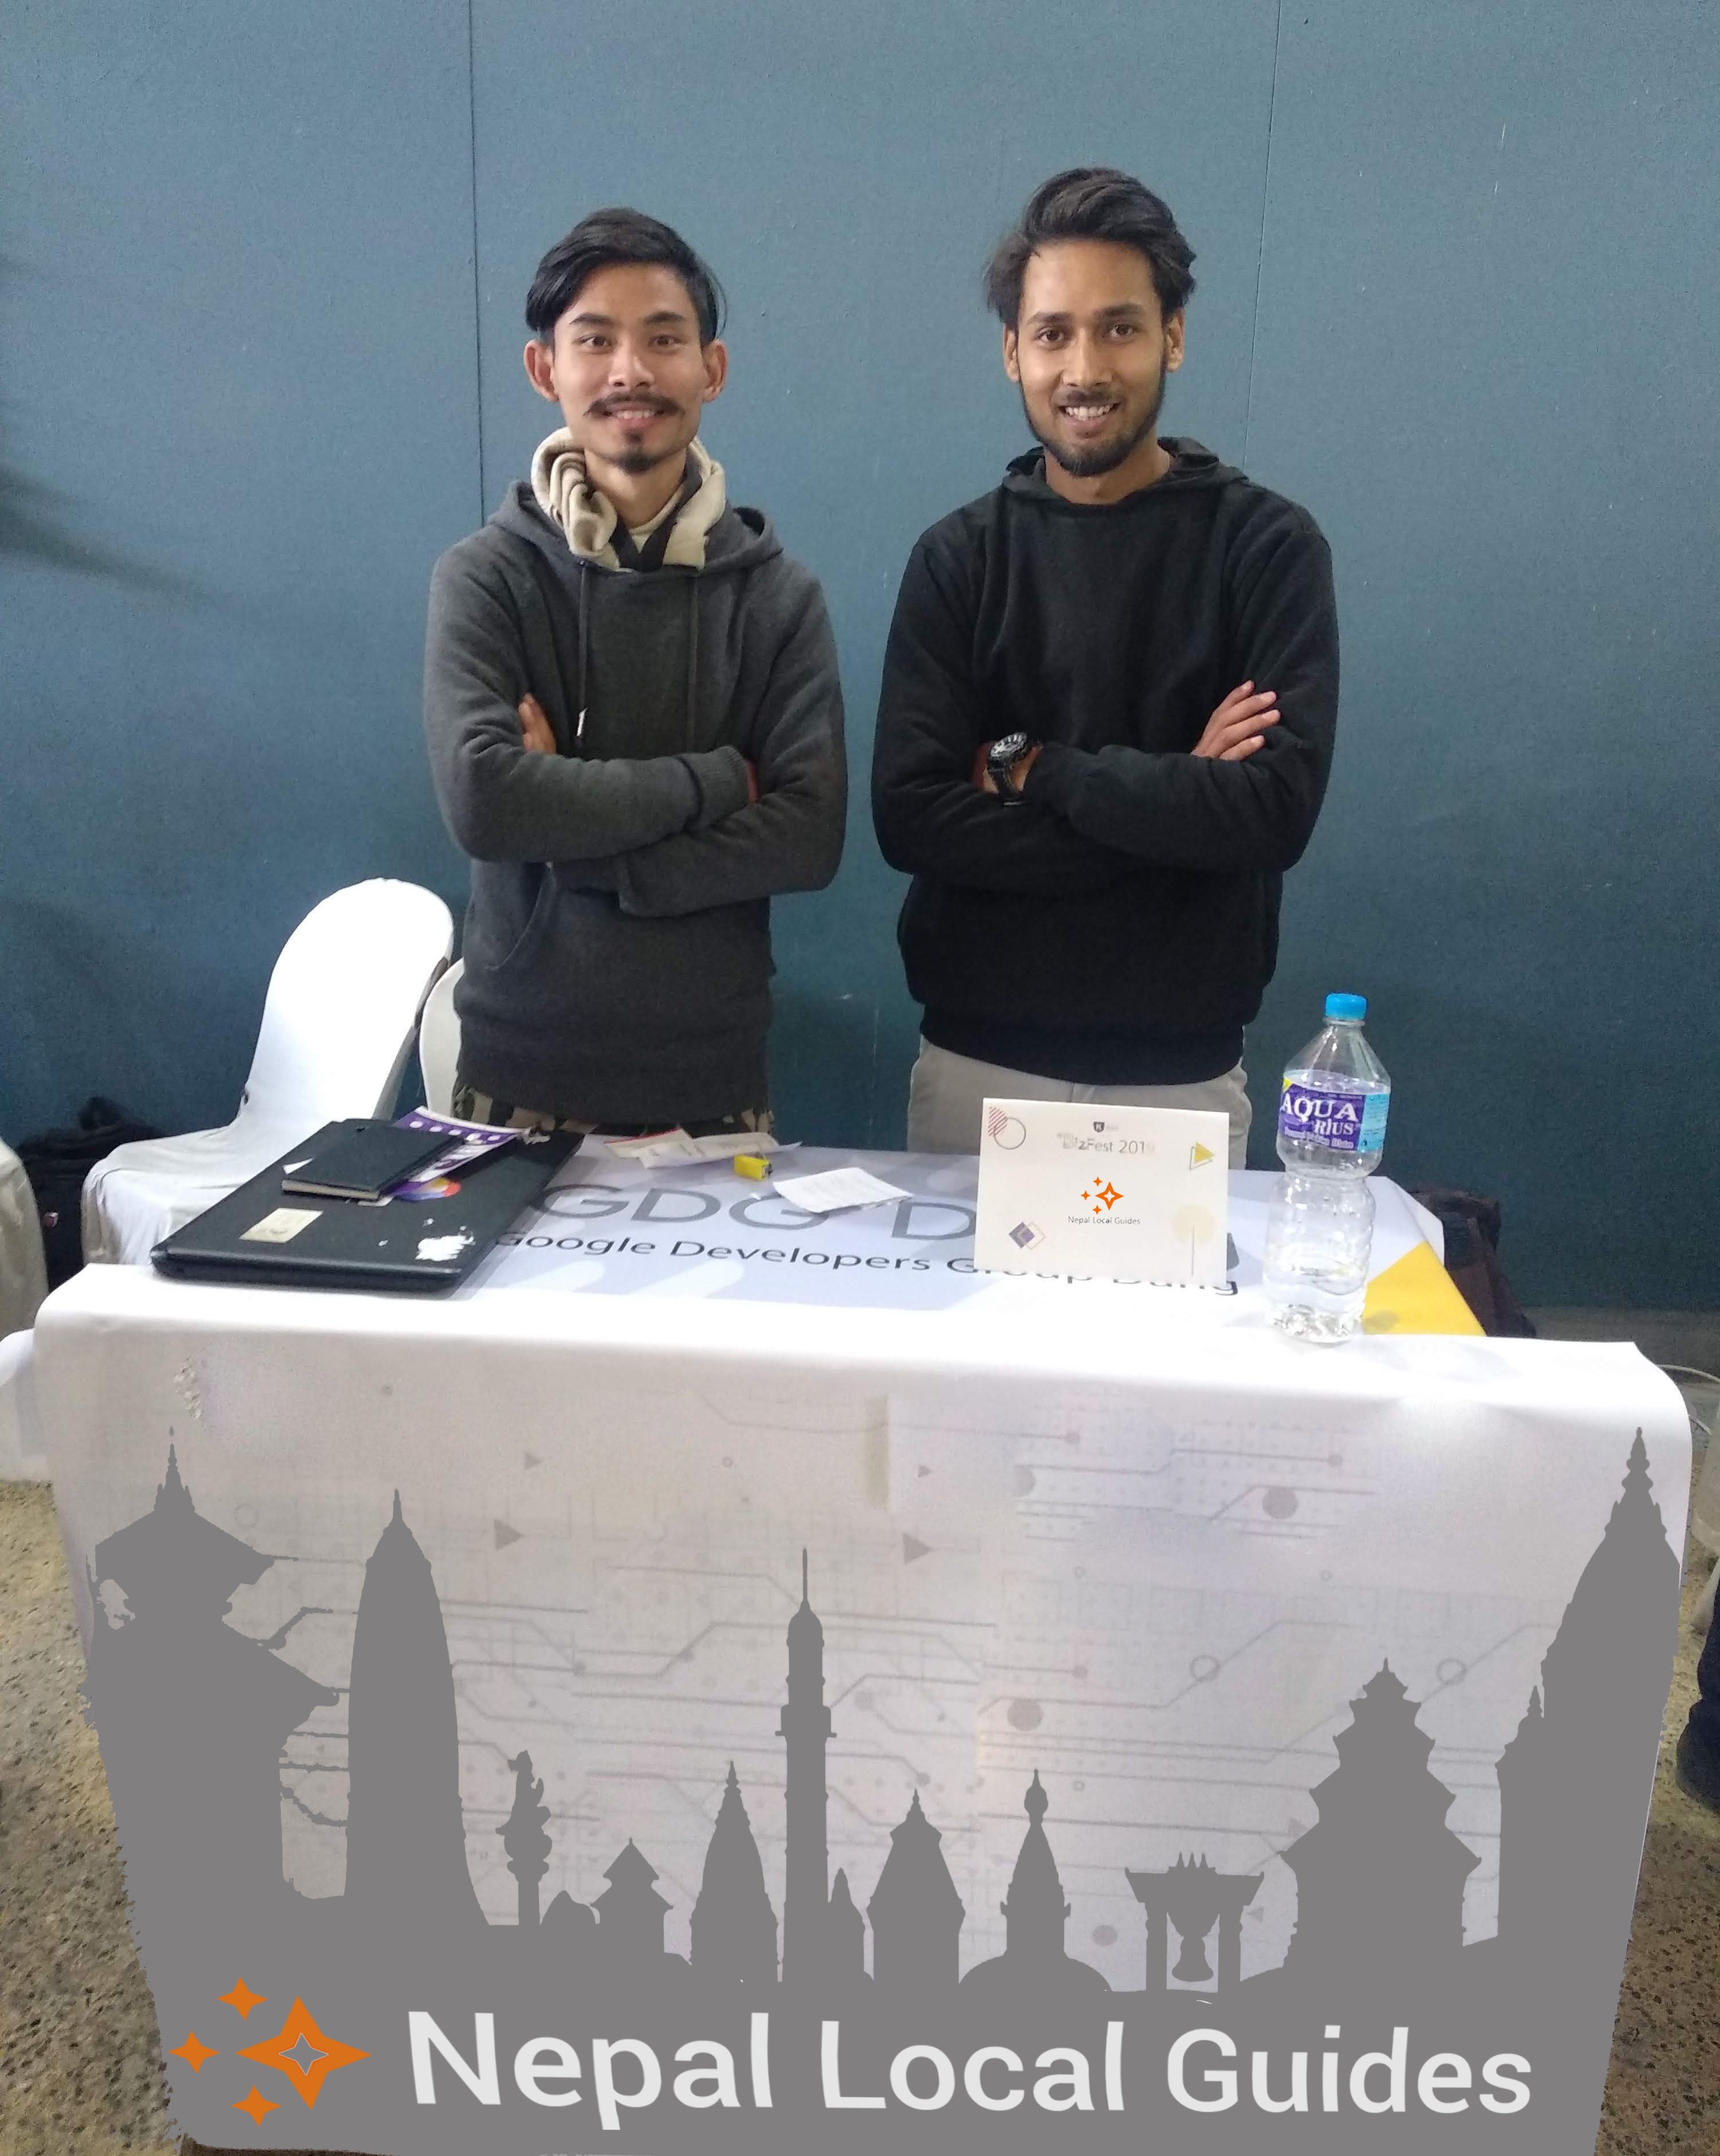 Manoj and Sushant at stall of Nepal Local Guides Community